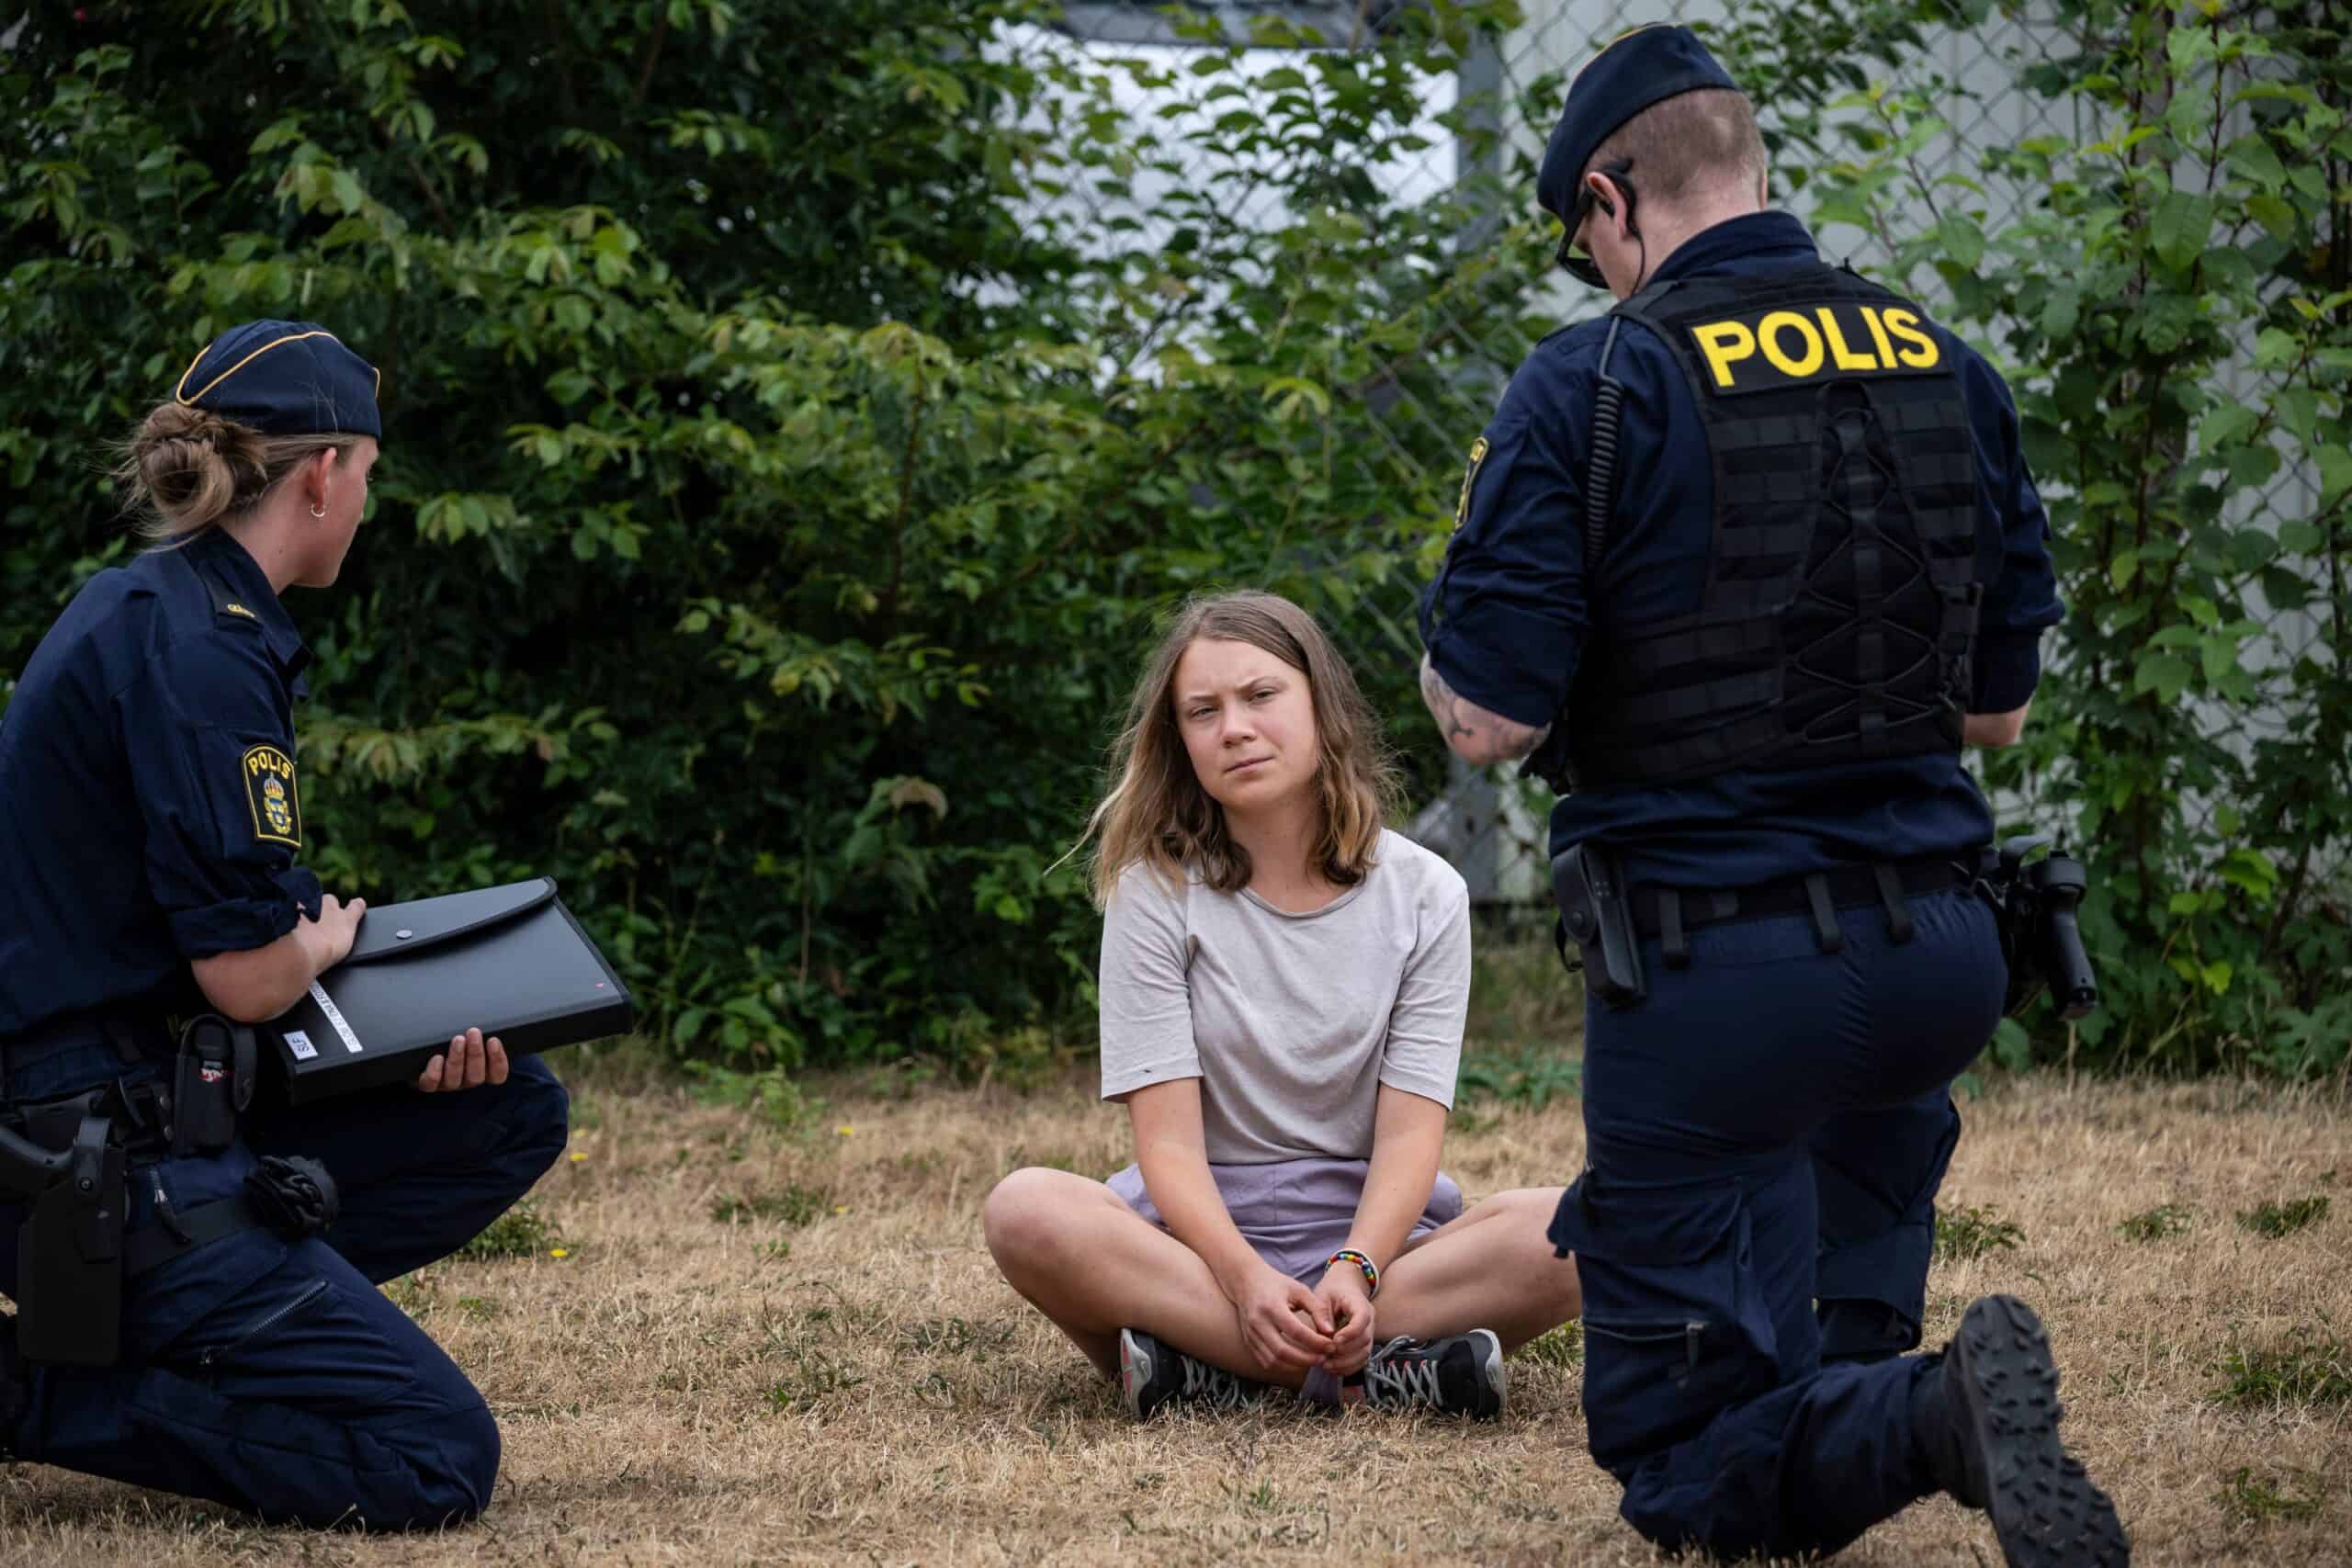 Greta Thunberg charged with disobeying police during climate protest in Sweden